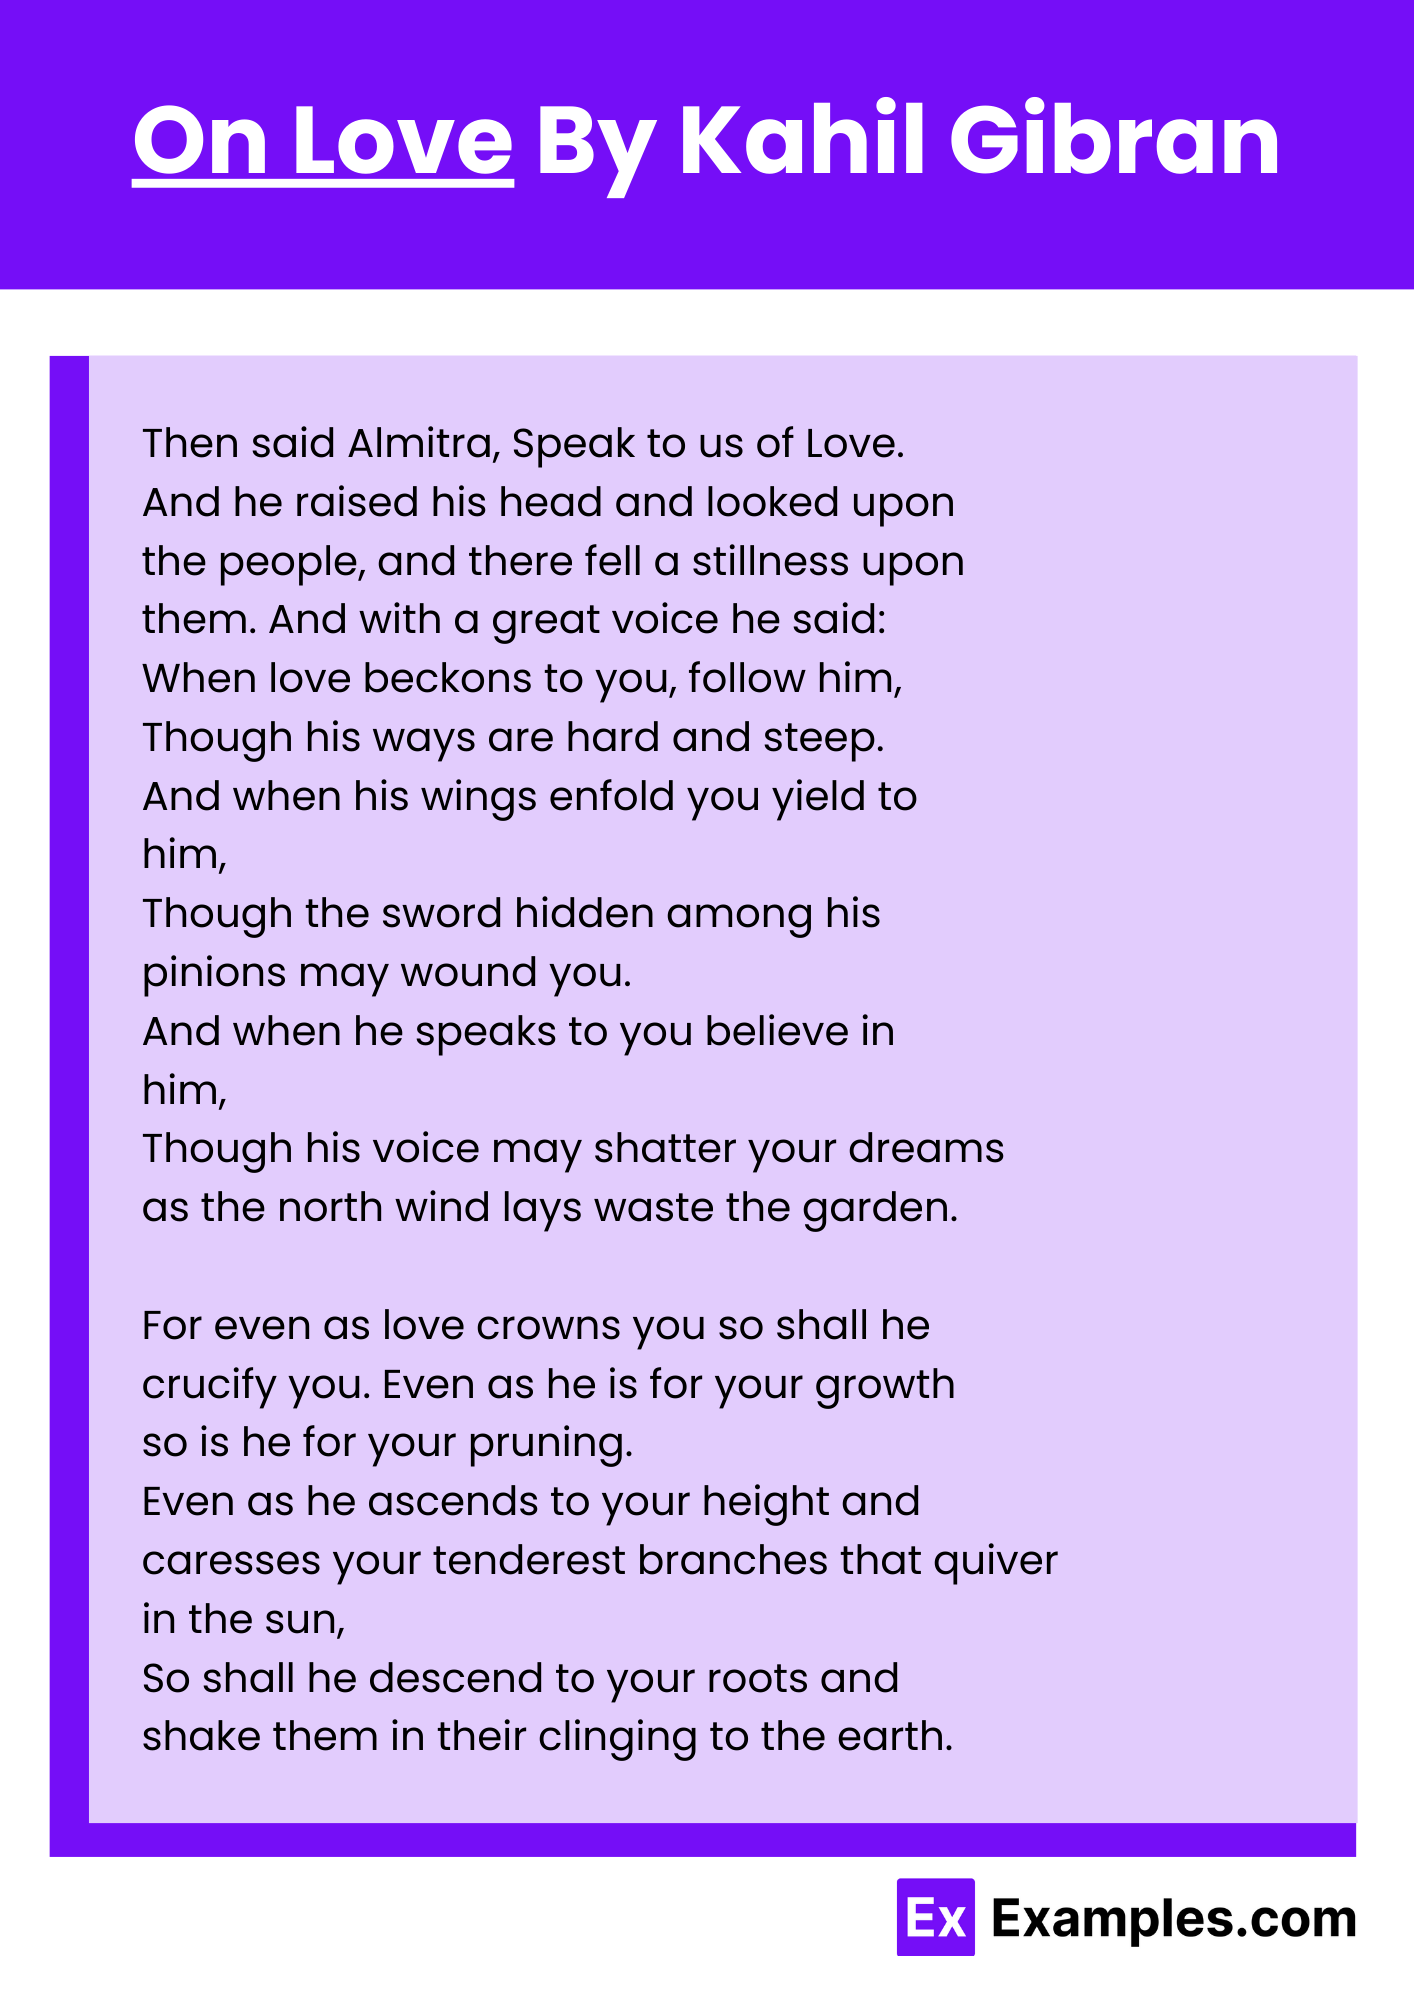 On Love By Kahil Gibran